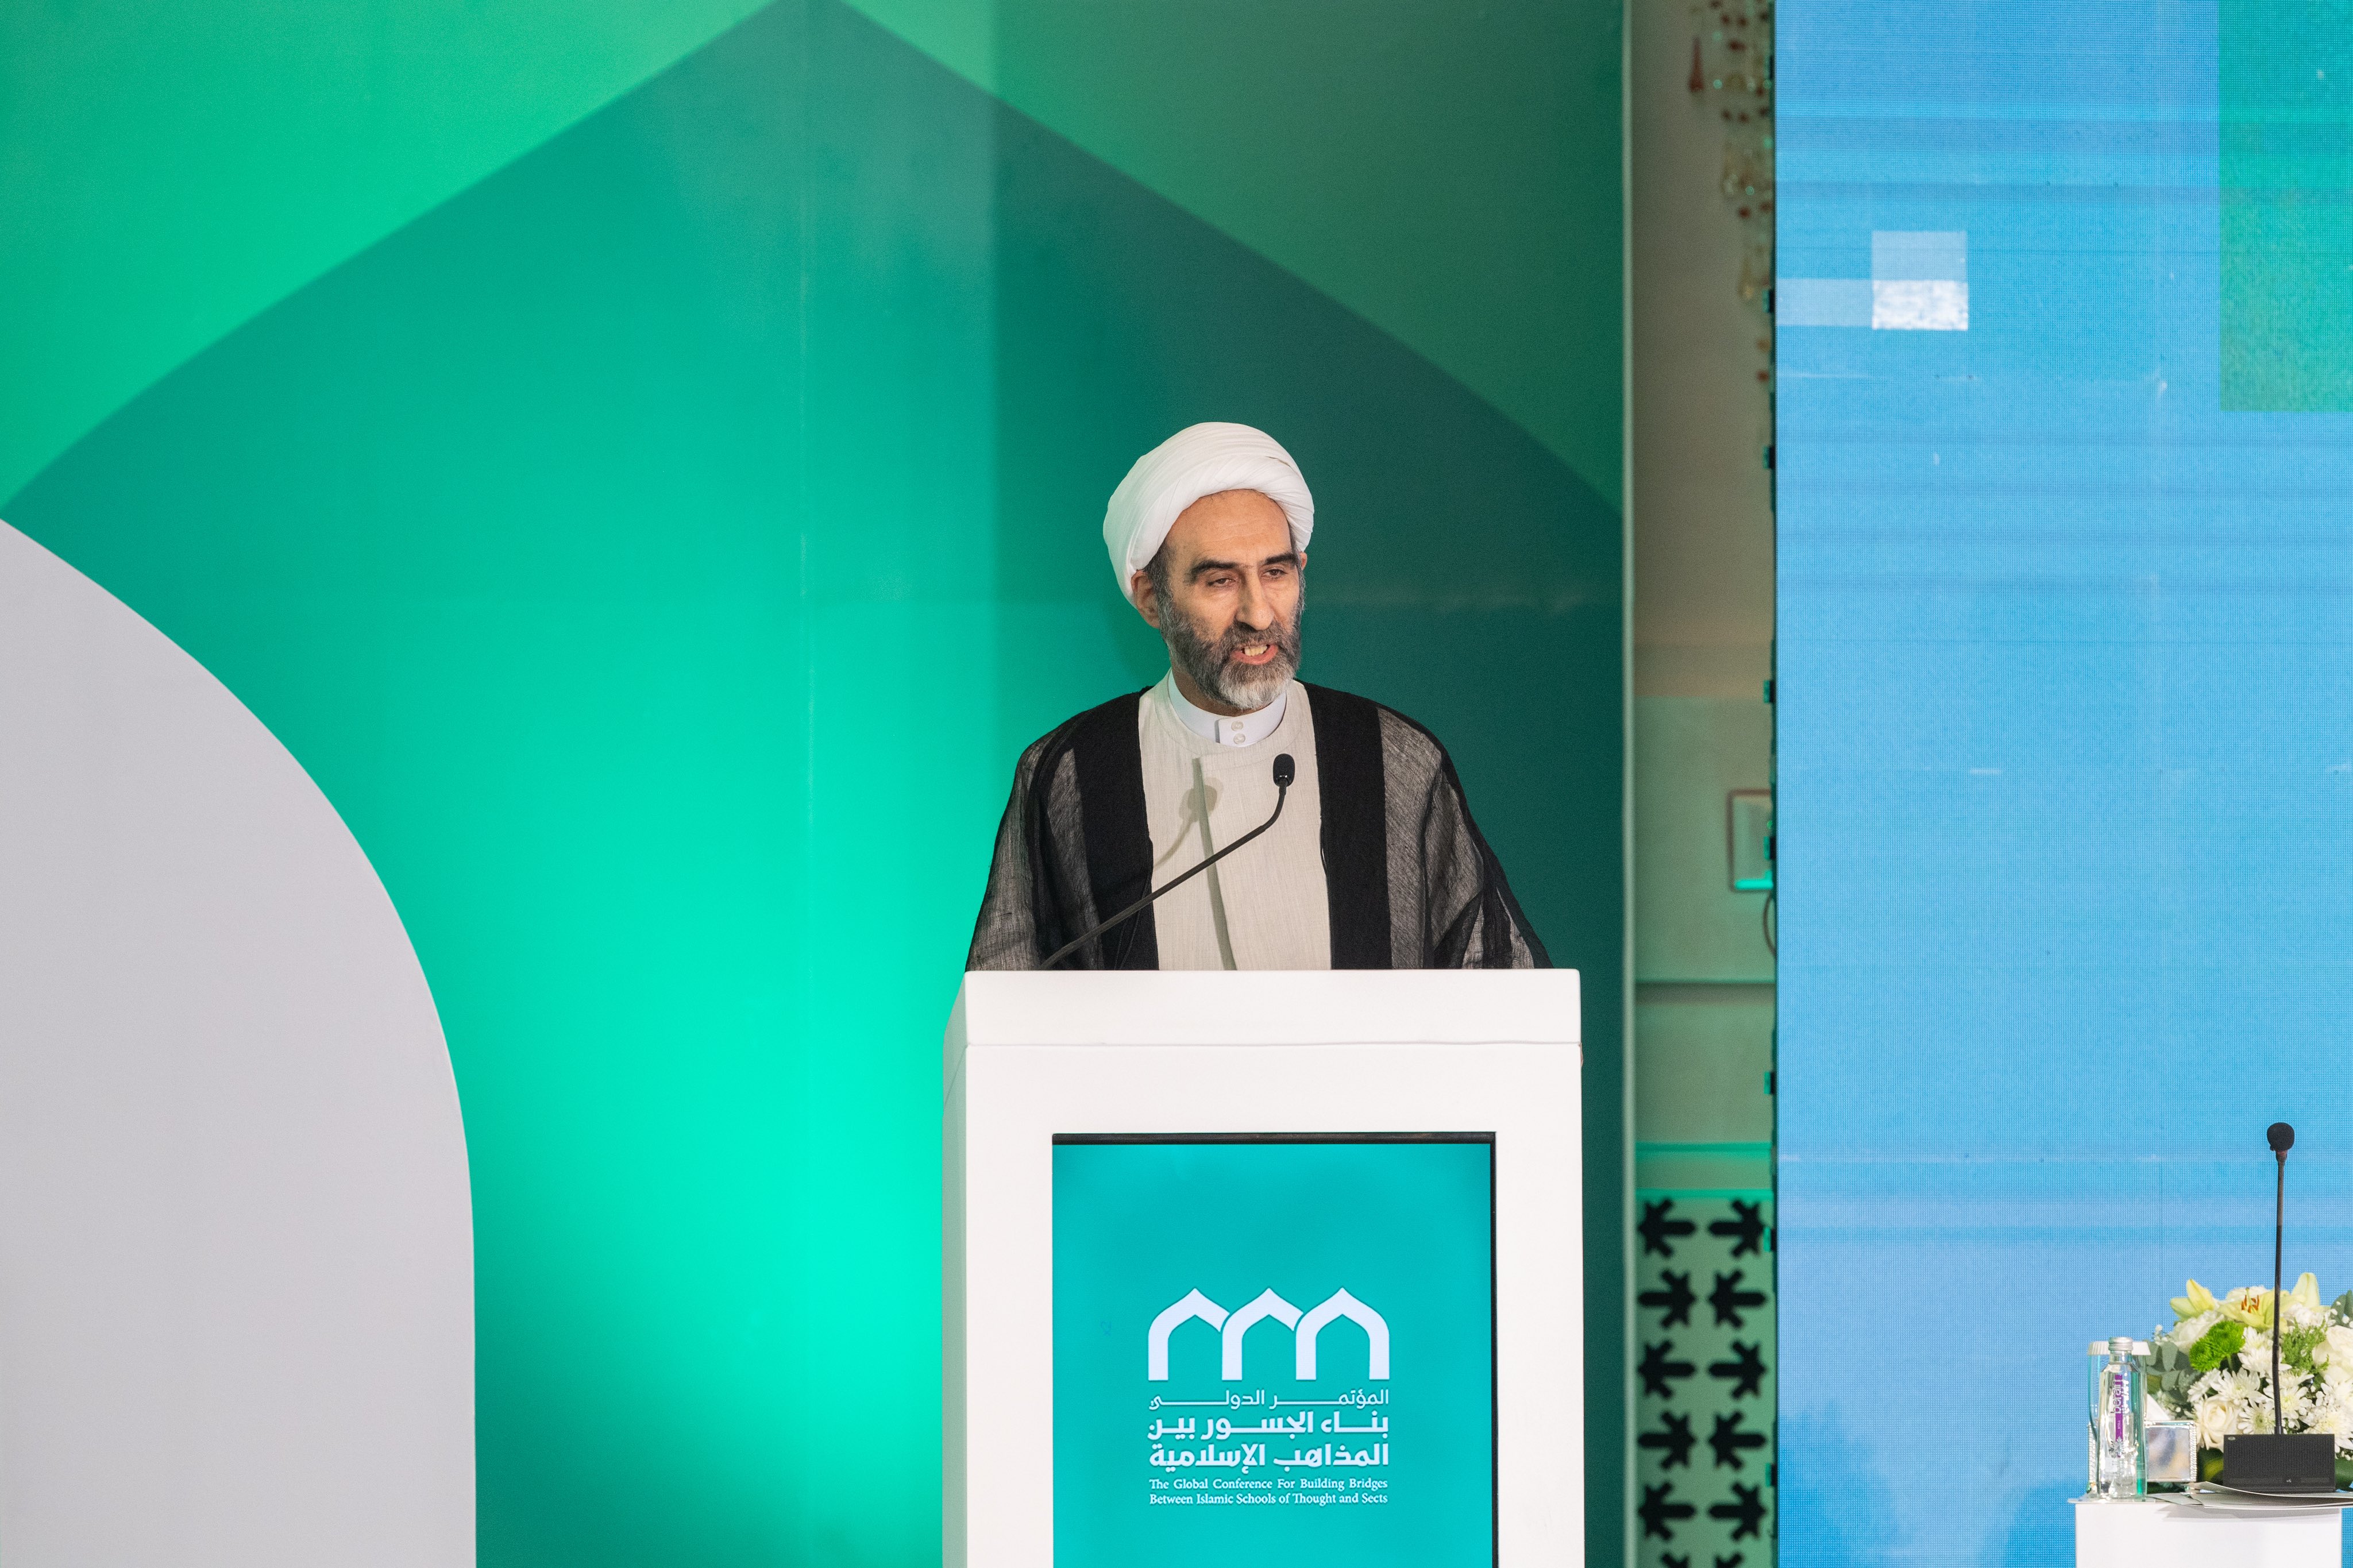 His Eminence Ayatollah Sheikh Ahmed Mobaleghi, a member of the Assembly of Experts in the Islamic Republic of Iran, at the opening ceremony of the Global Conference for Building Bridges between Islamic Schools of Thought and Sects: 